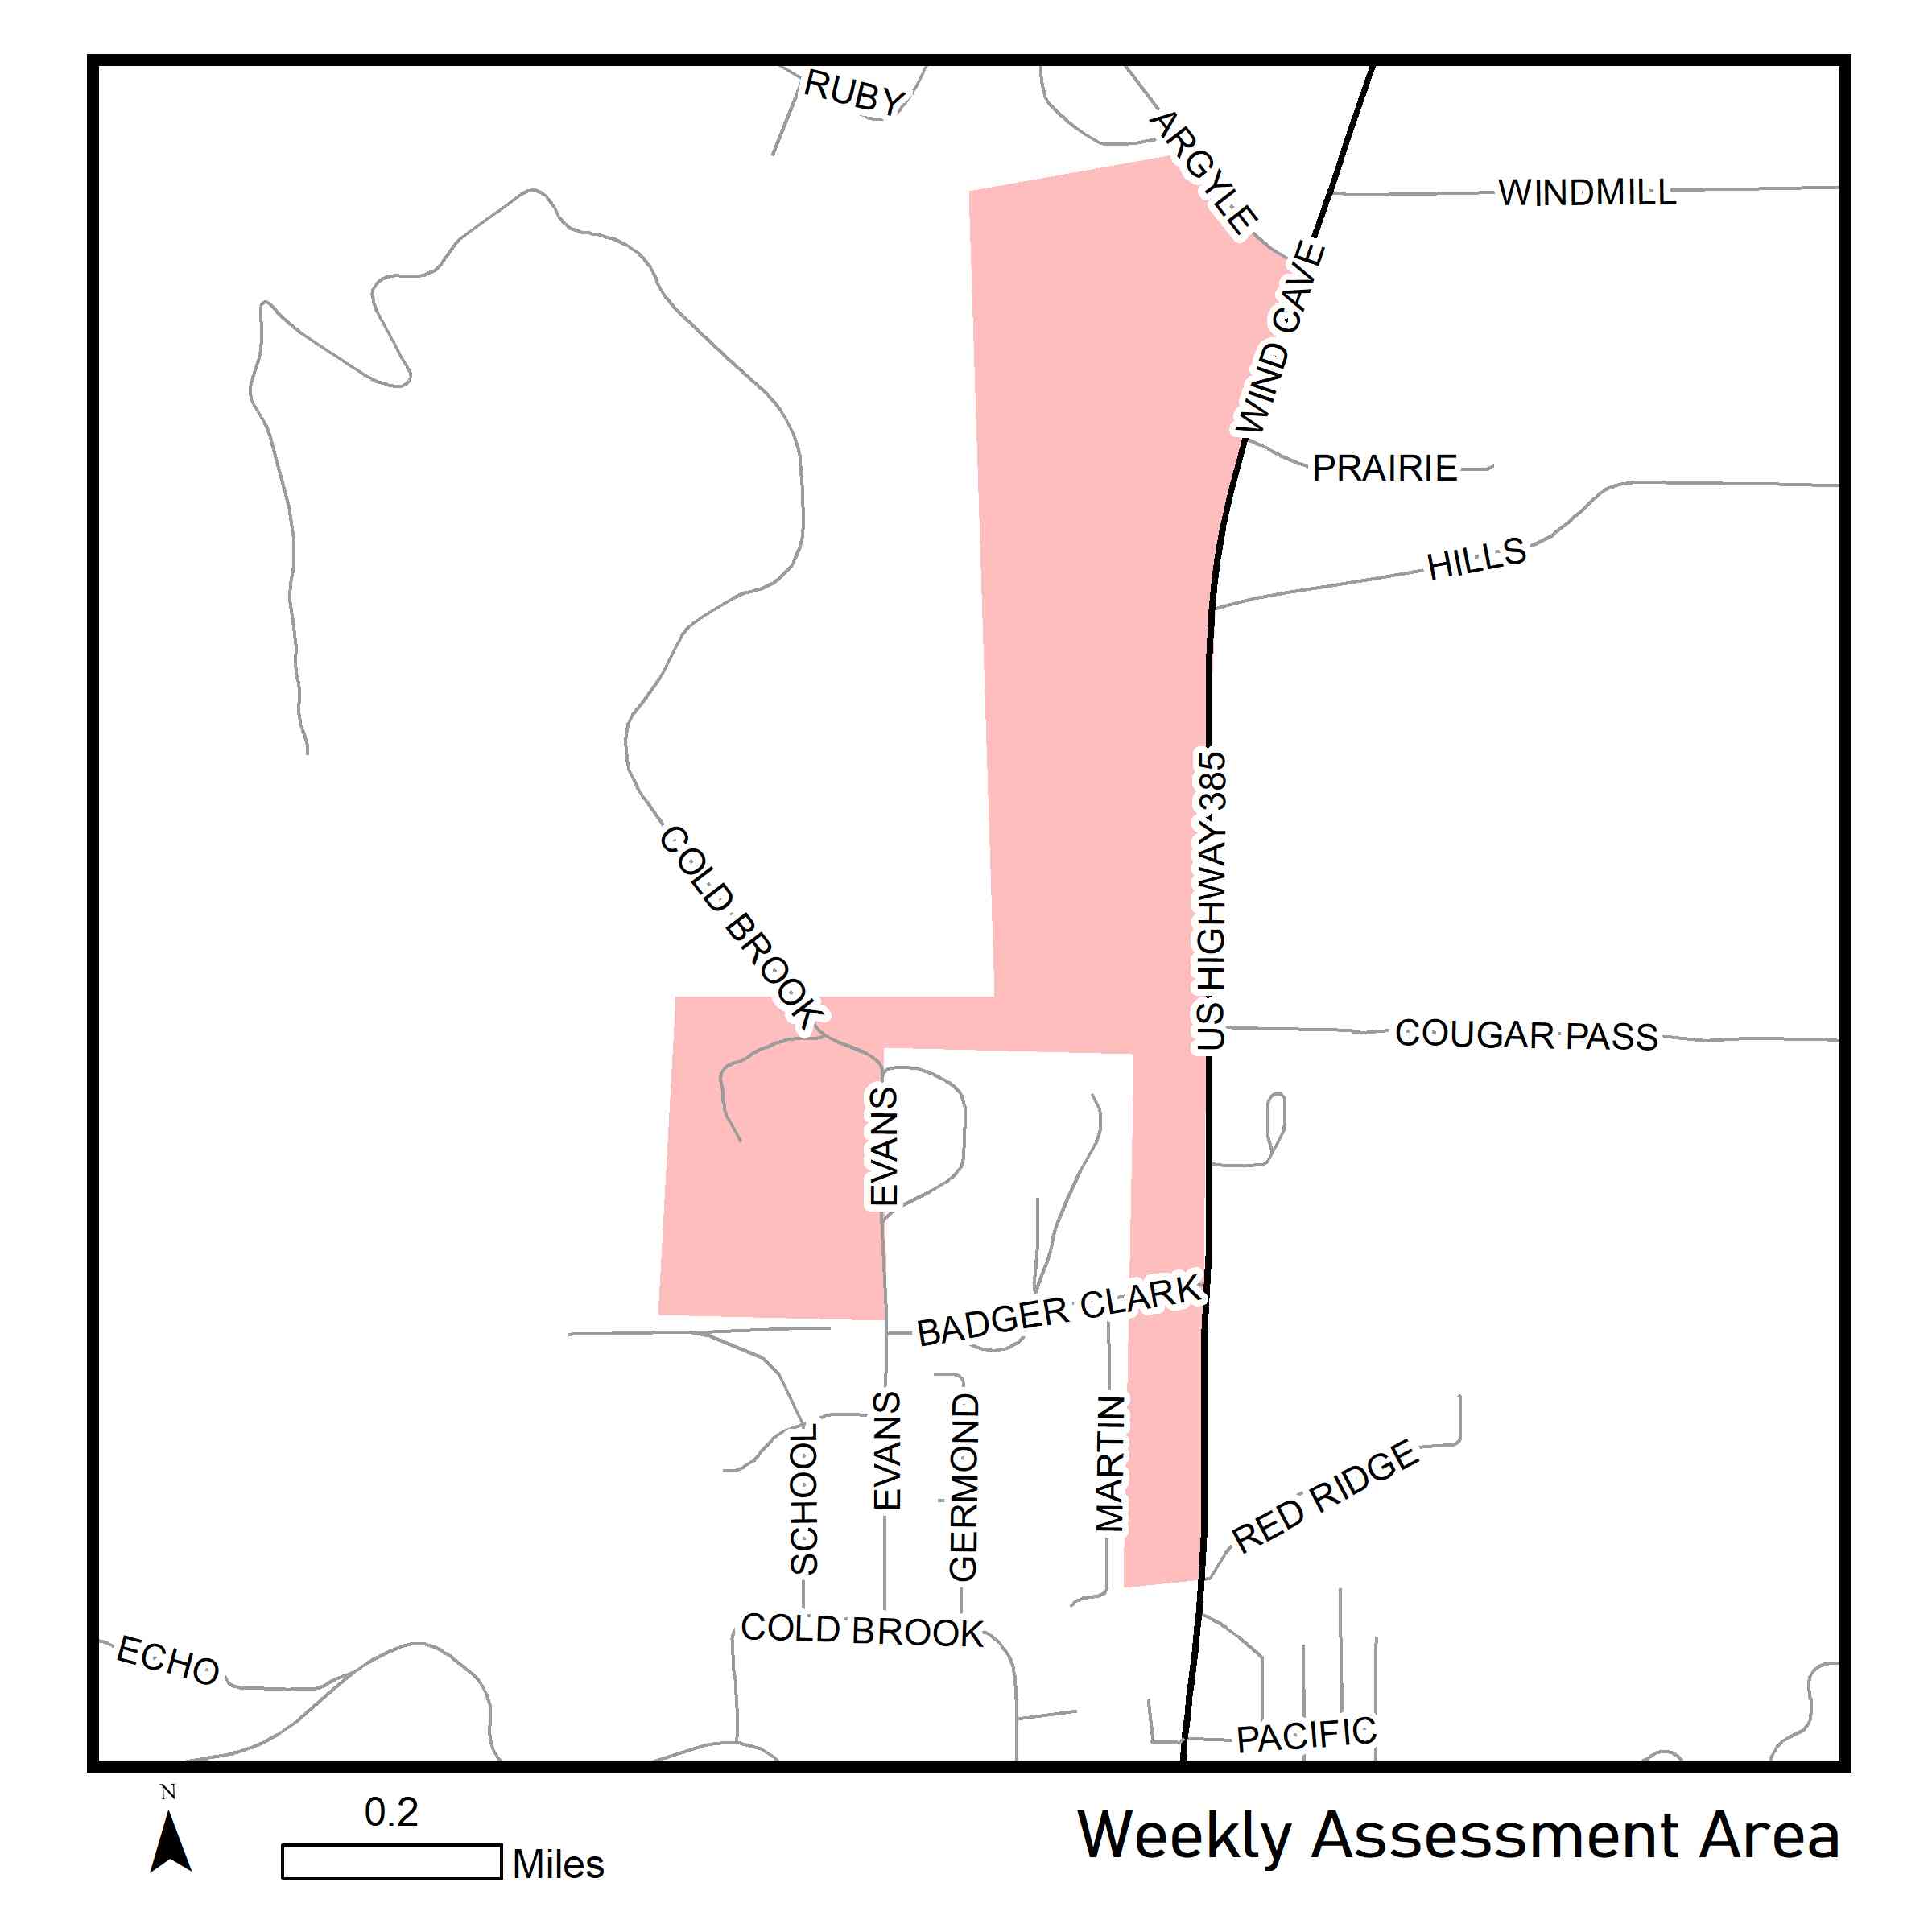 Map of reassessment area for September 4th.